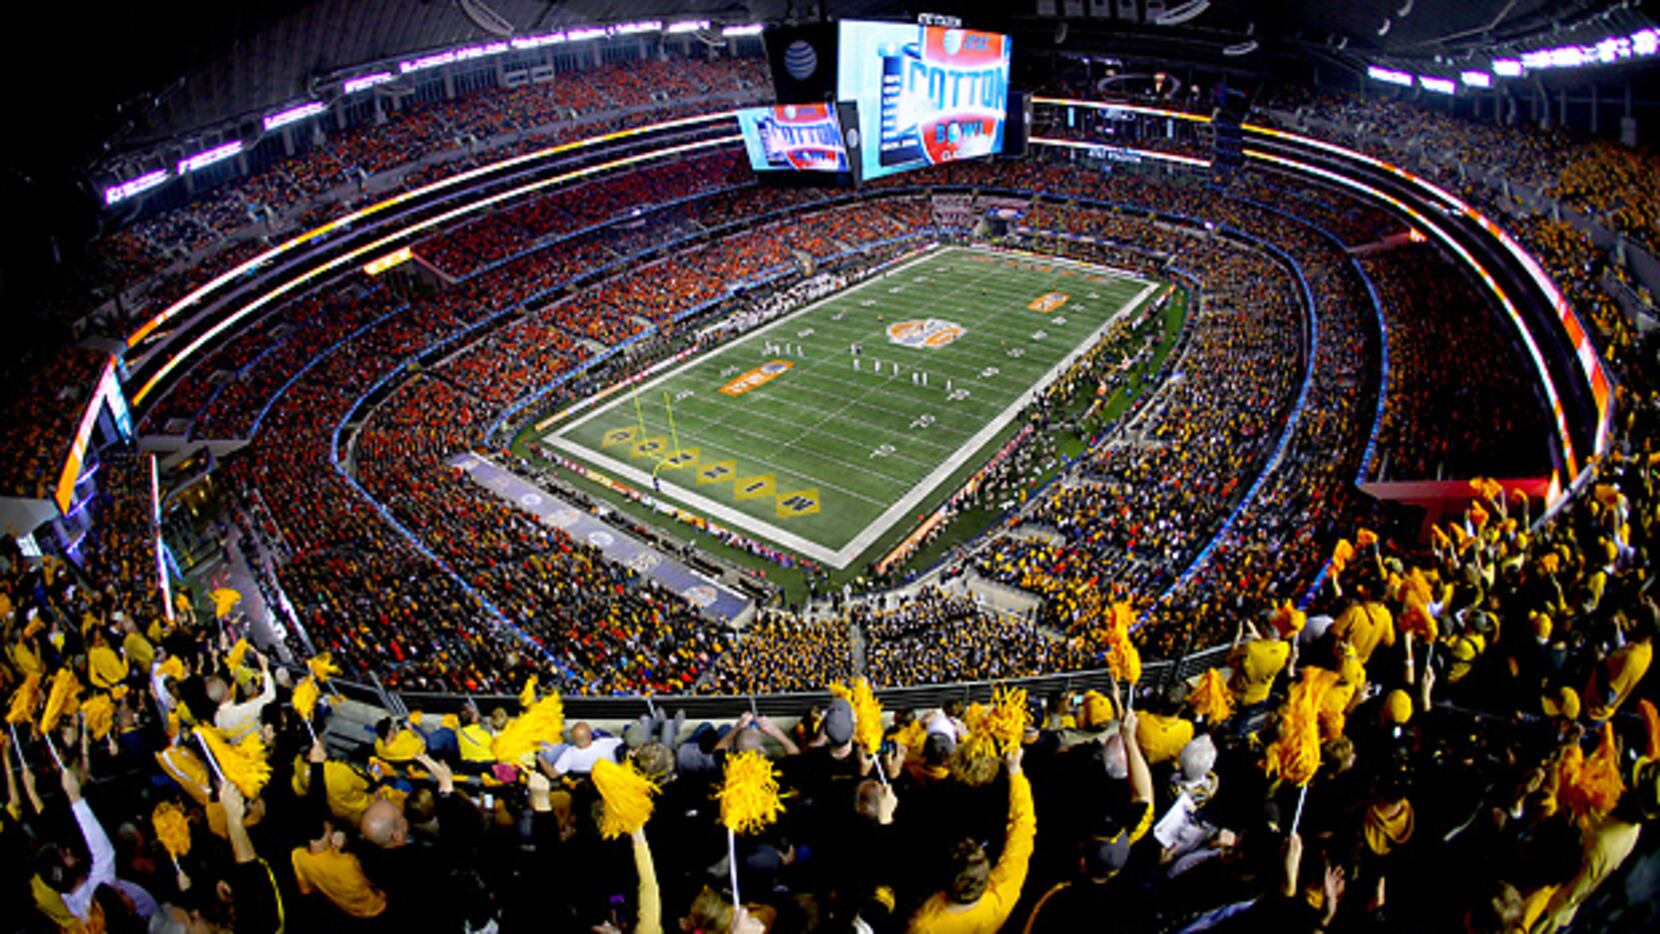 AT&T Among Sponsors for ESPN CFP National Championship Game